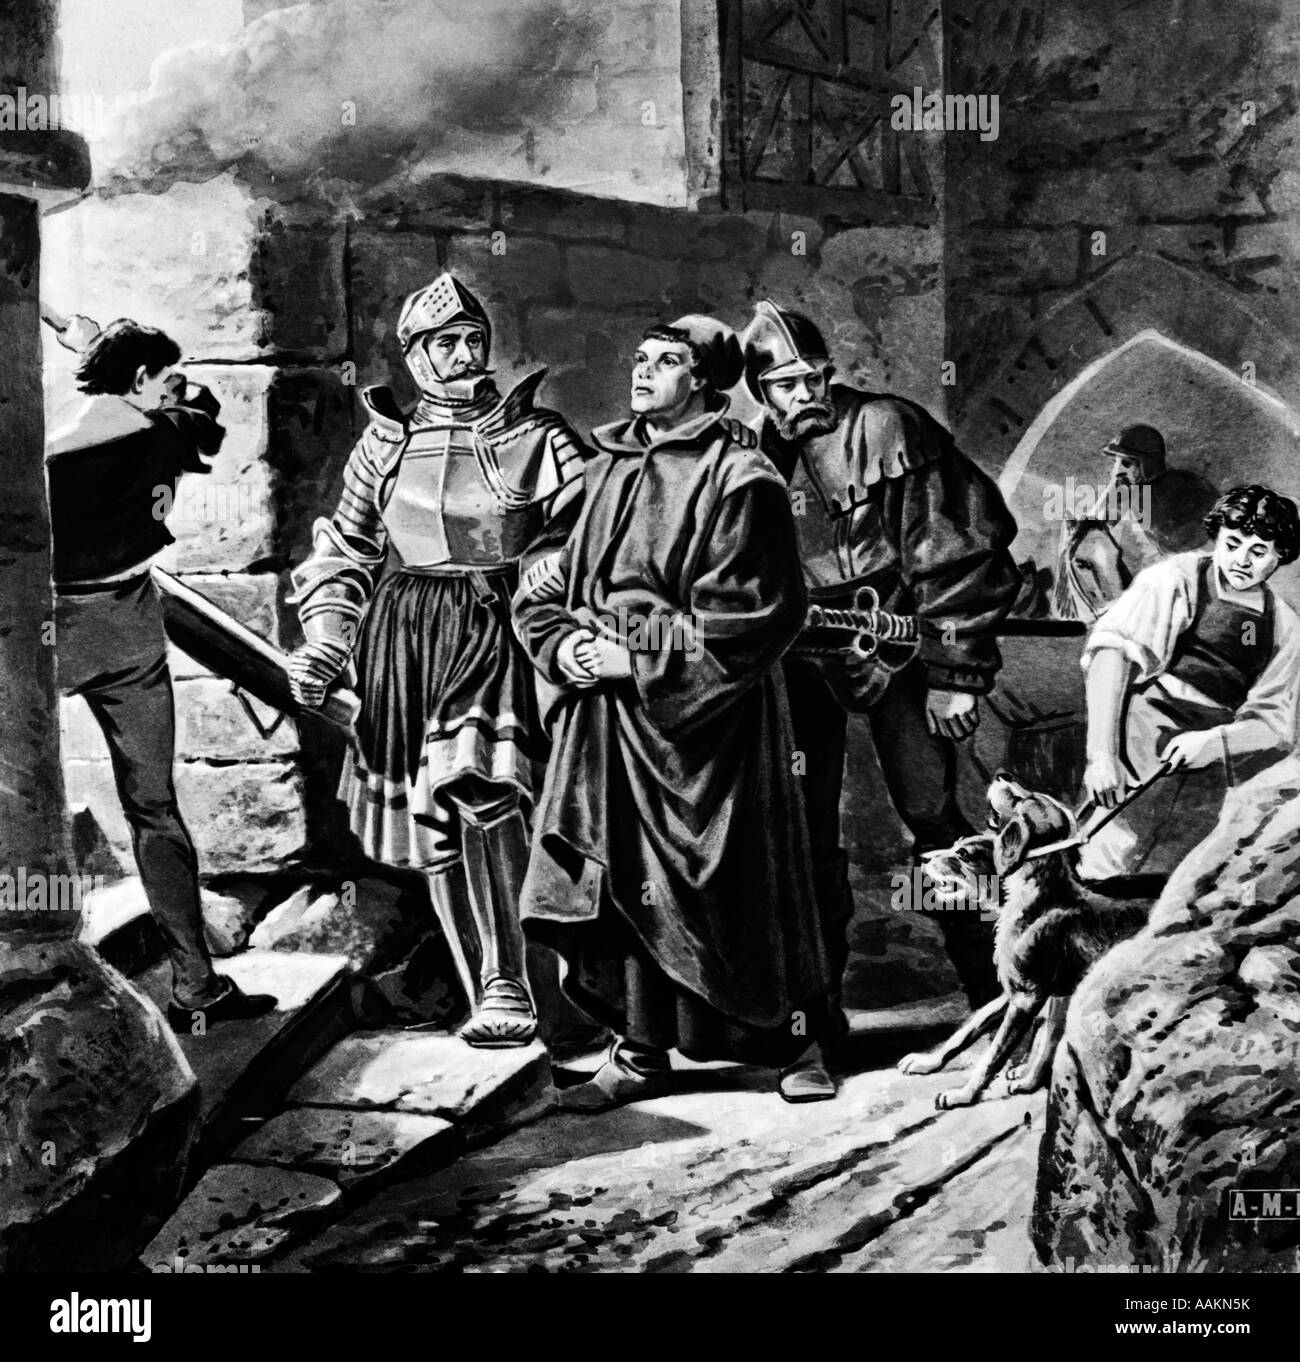 1500s MARTIN LUTHER GERMAN LEADER OF THE REFORMATION ARRIVING AT CASTLE WARTBURG Stock Photo